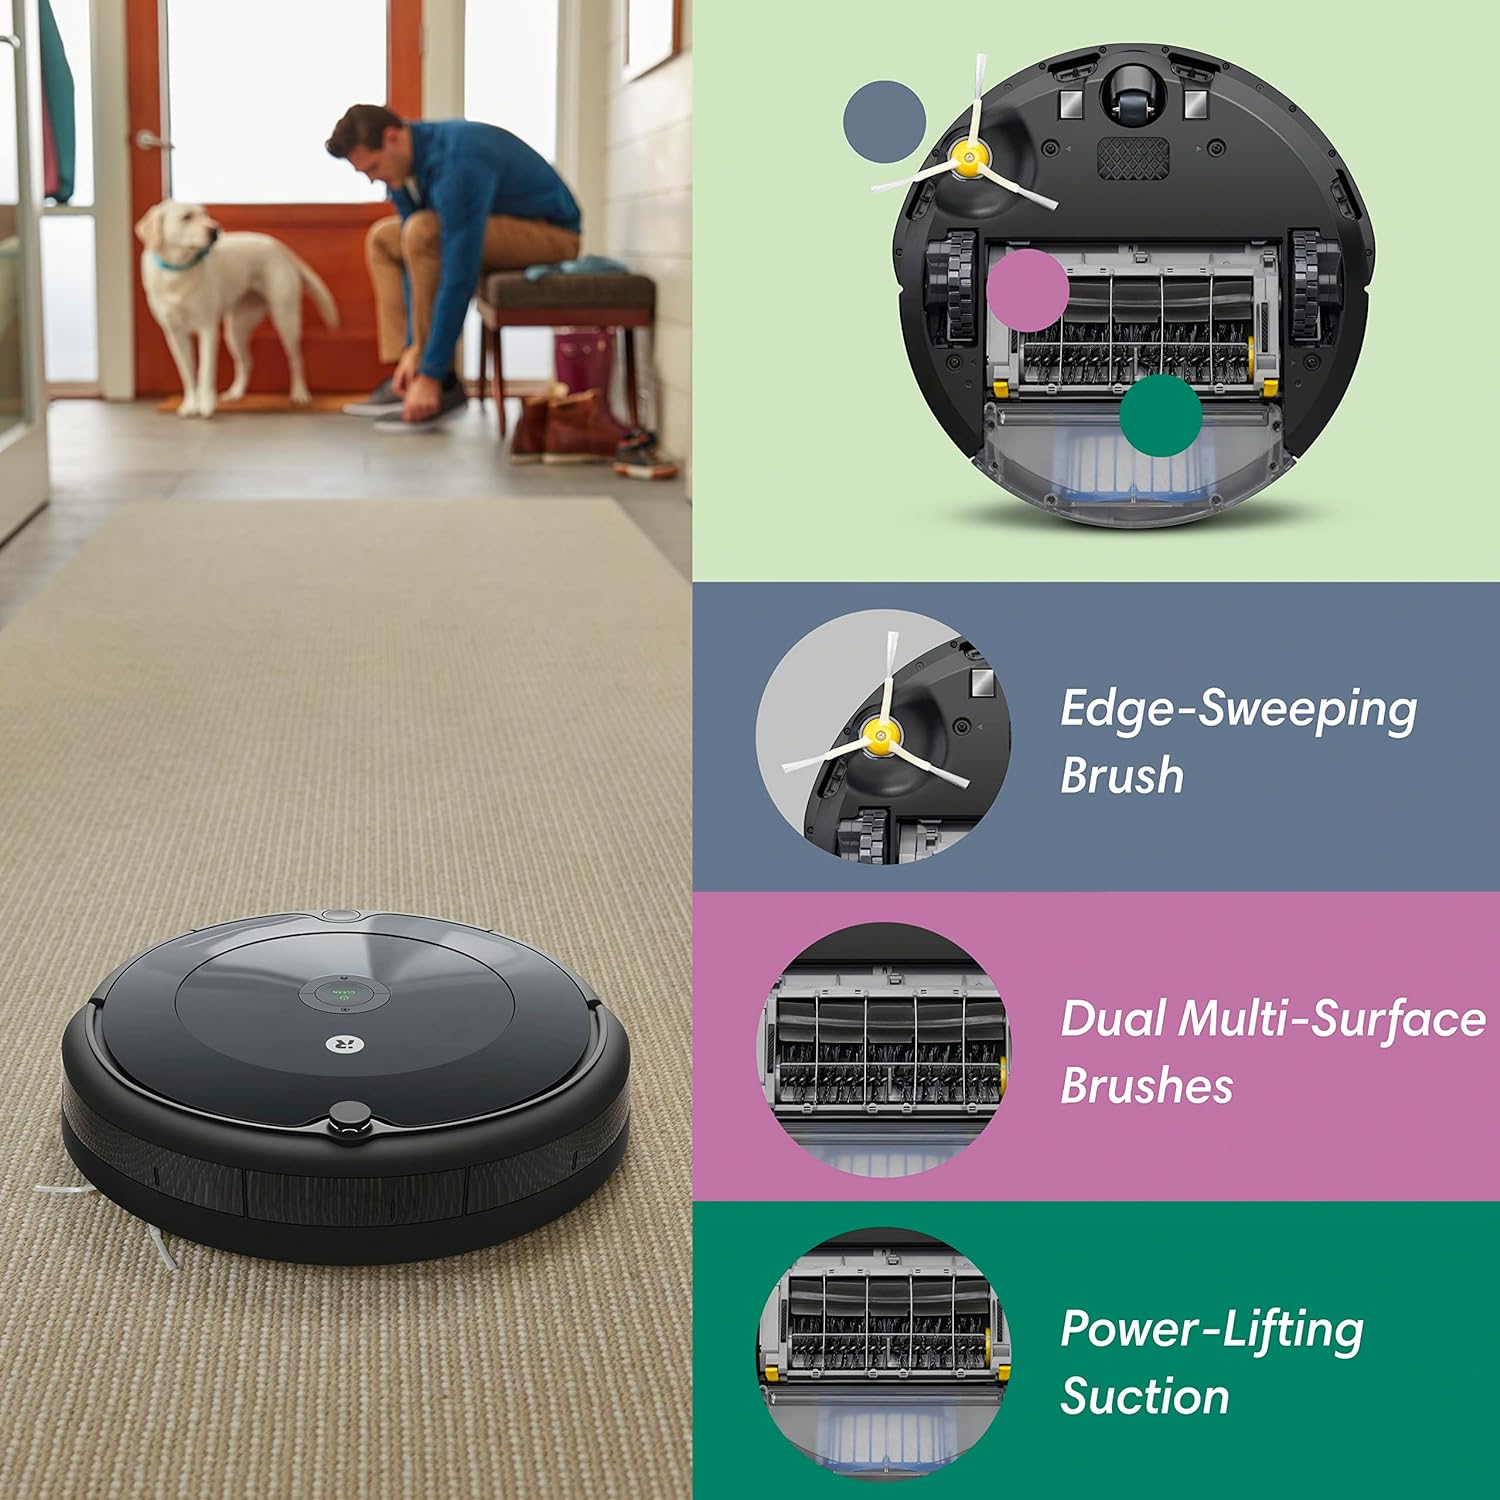 iRobot Roomba 690 Robot Vacuum-Wi-Fi Connectivity, Works with Alexa, Good  for Pet Hair, Carpets, Hard Floors, Self-Charging